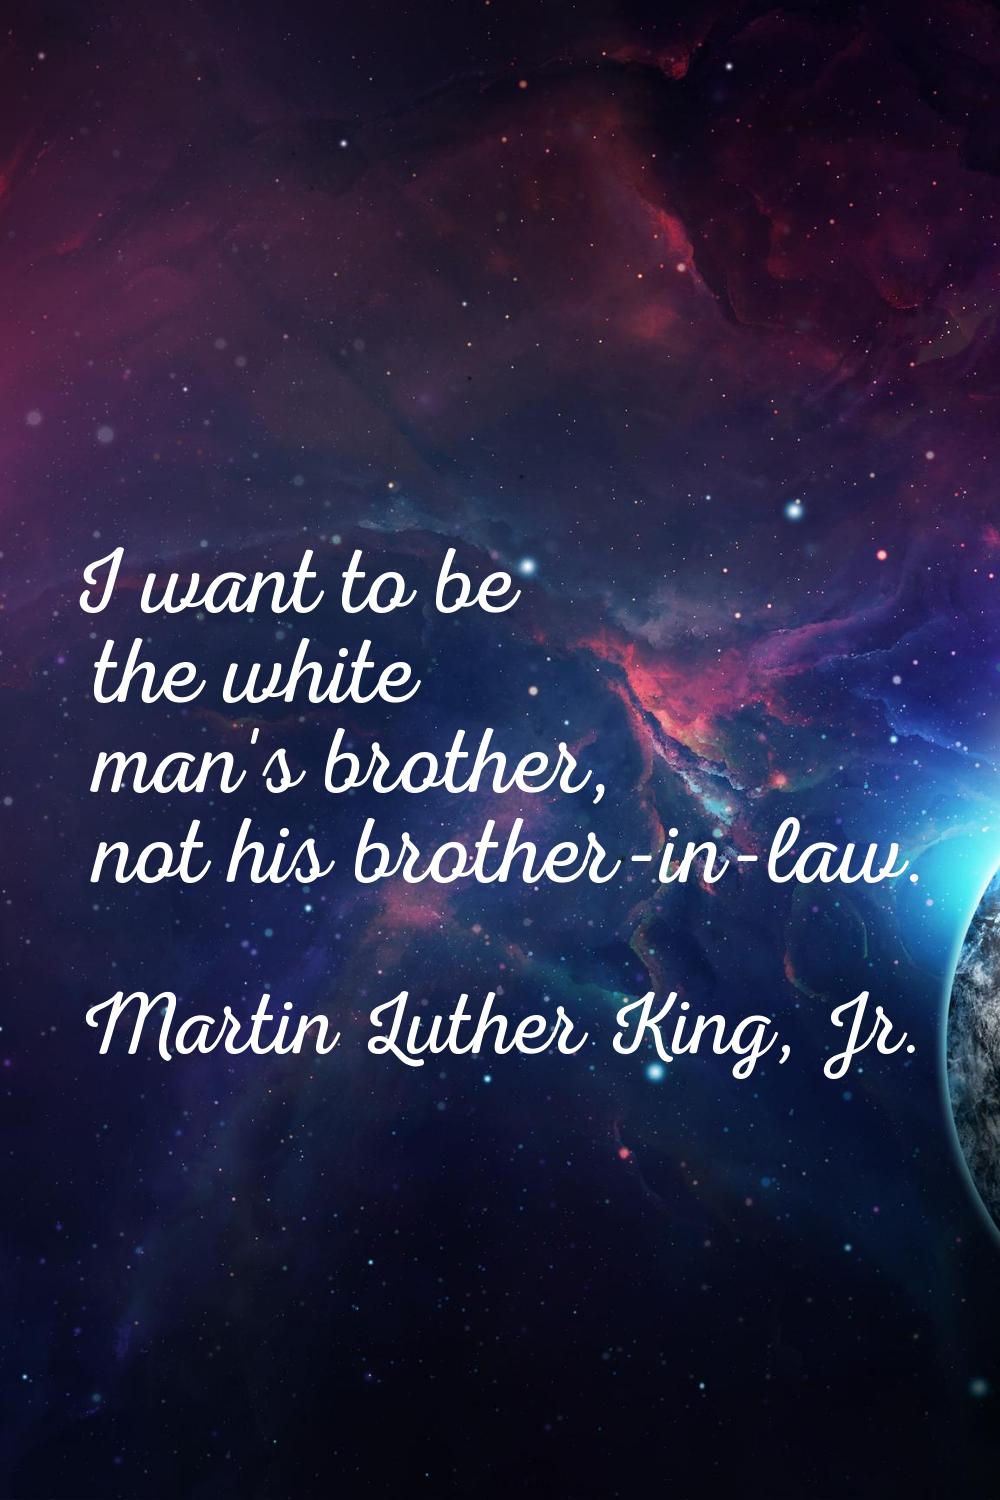 I want to be the white man's brother, not his brother-in-law.